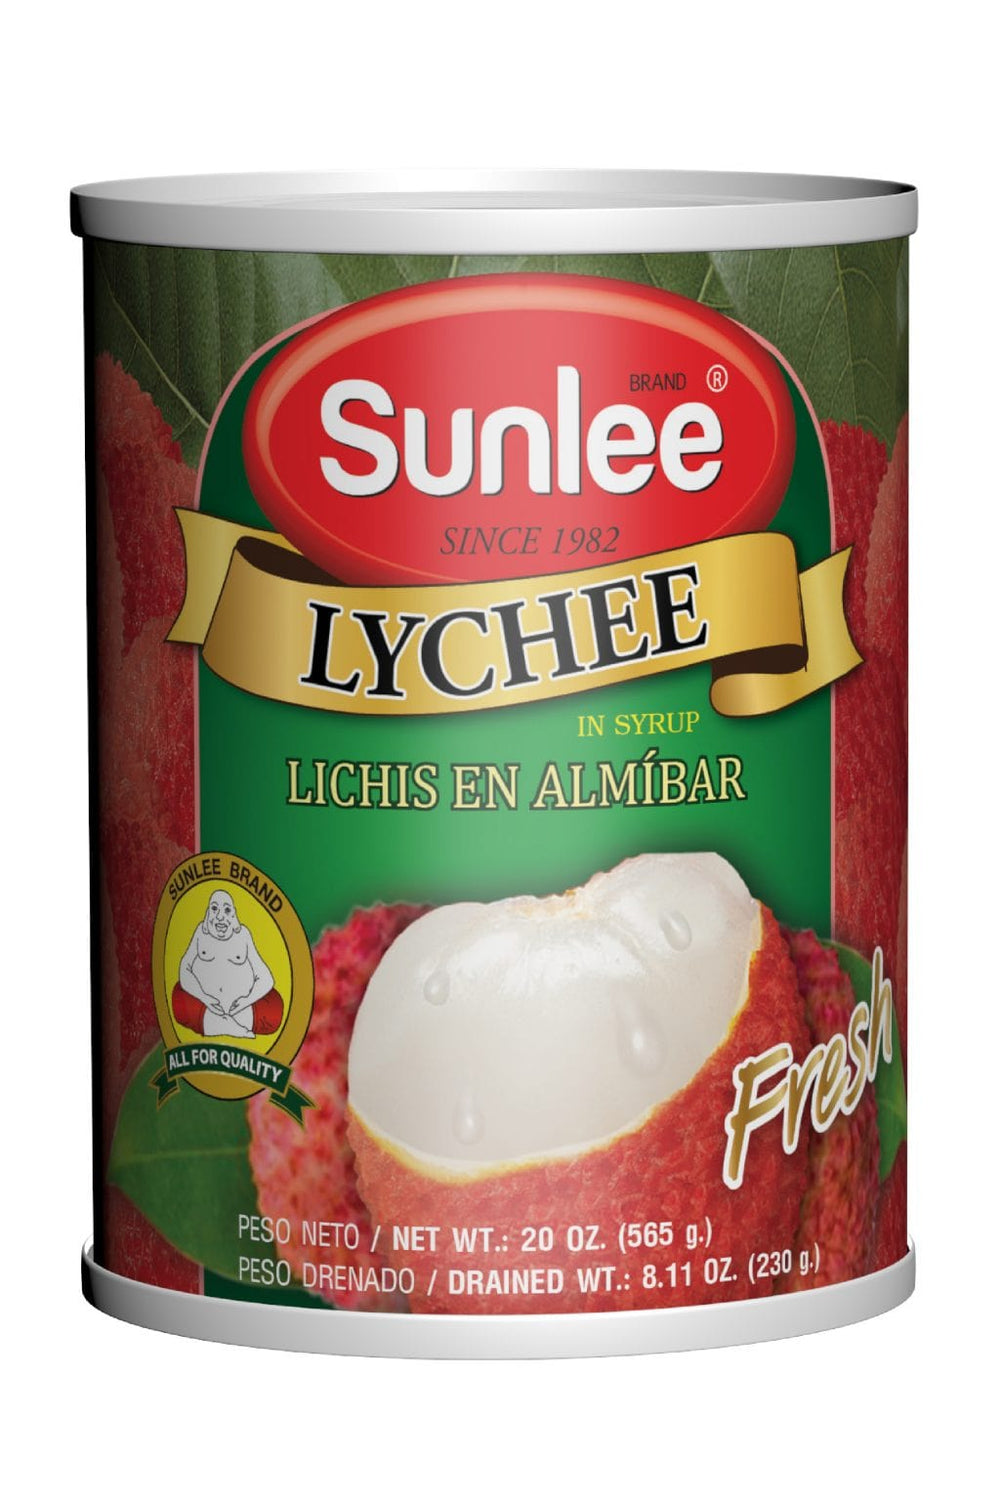 Sunlee Lychee in Syrup